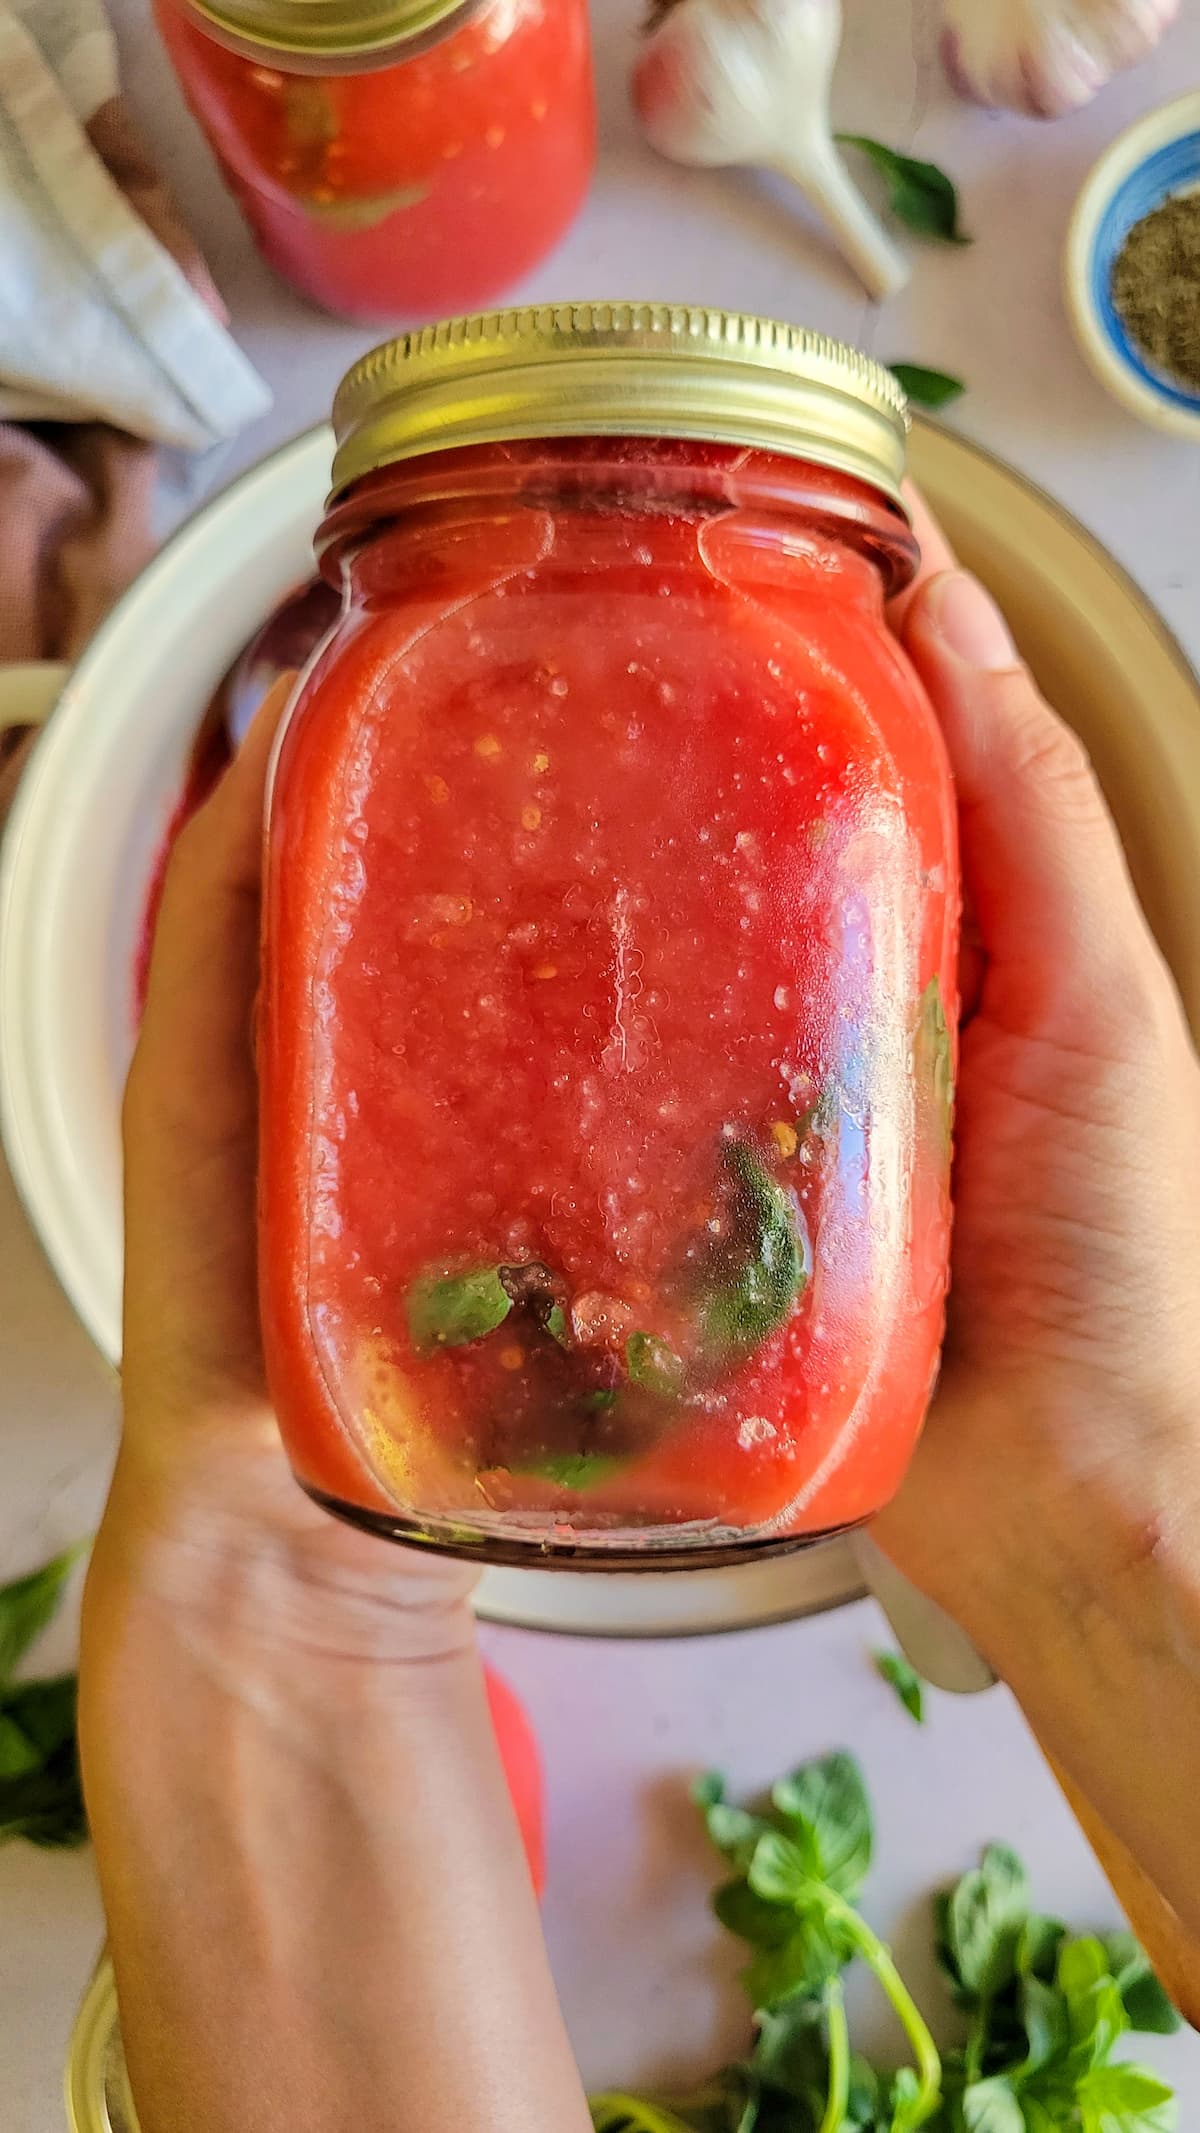 hands holding a jar of tomato sauce with basil, more herbs and jars in the background